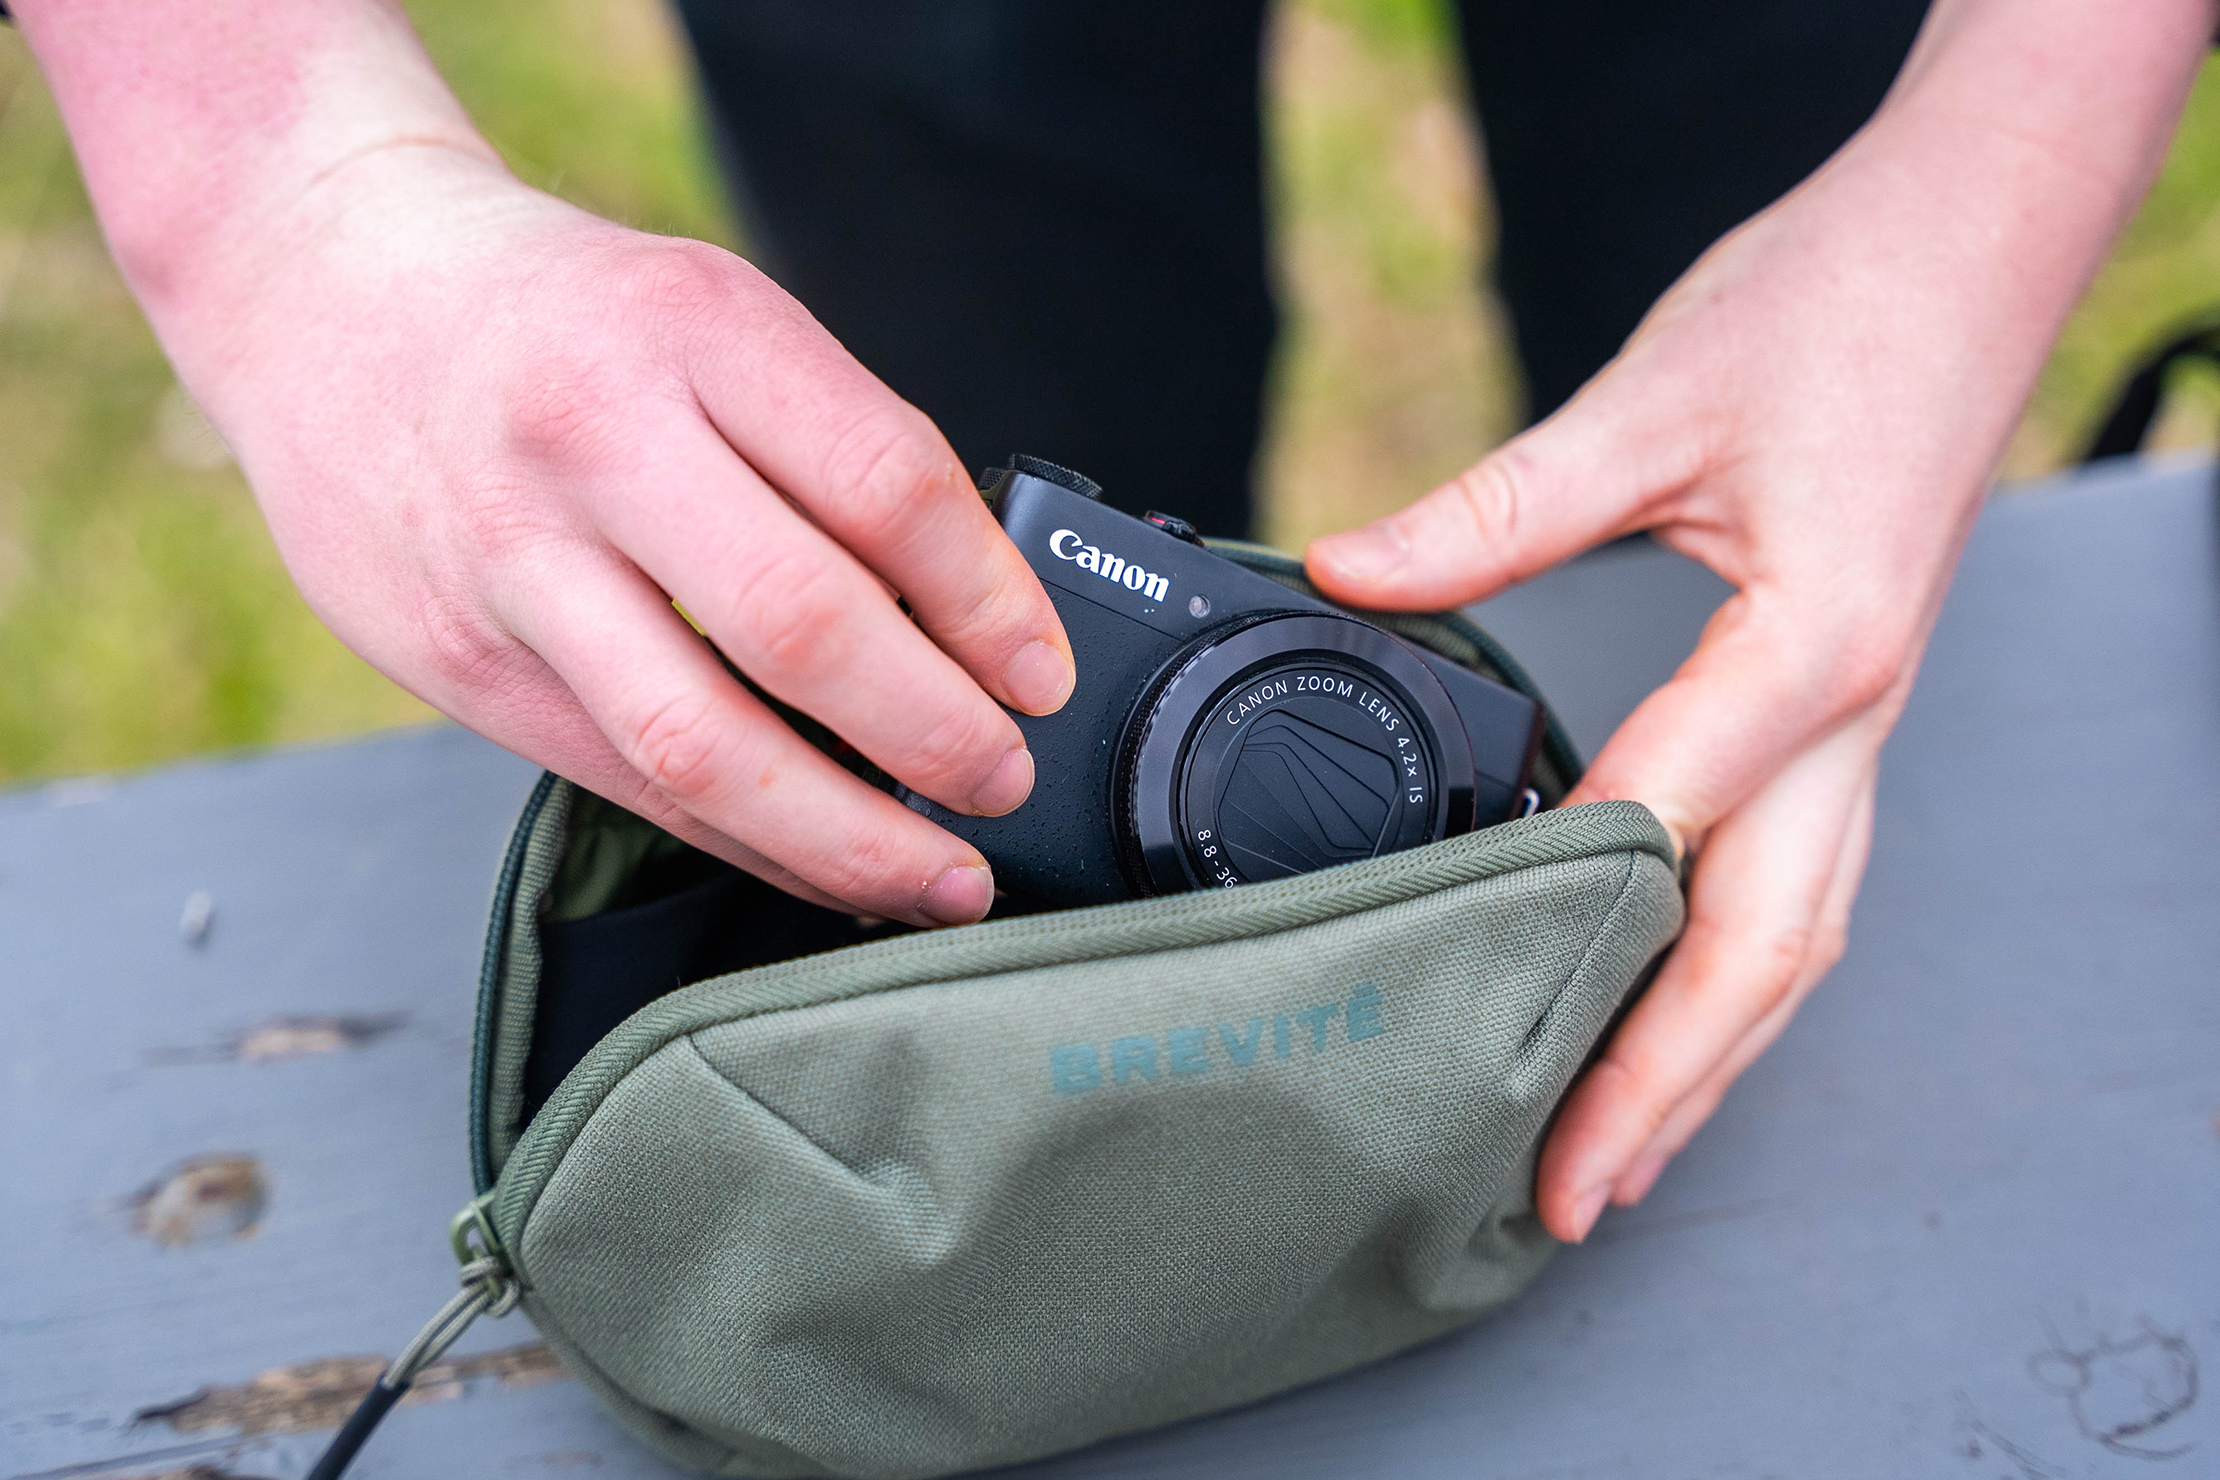 Brevite Pouch In Use